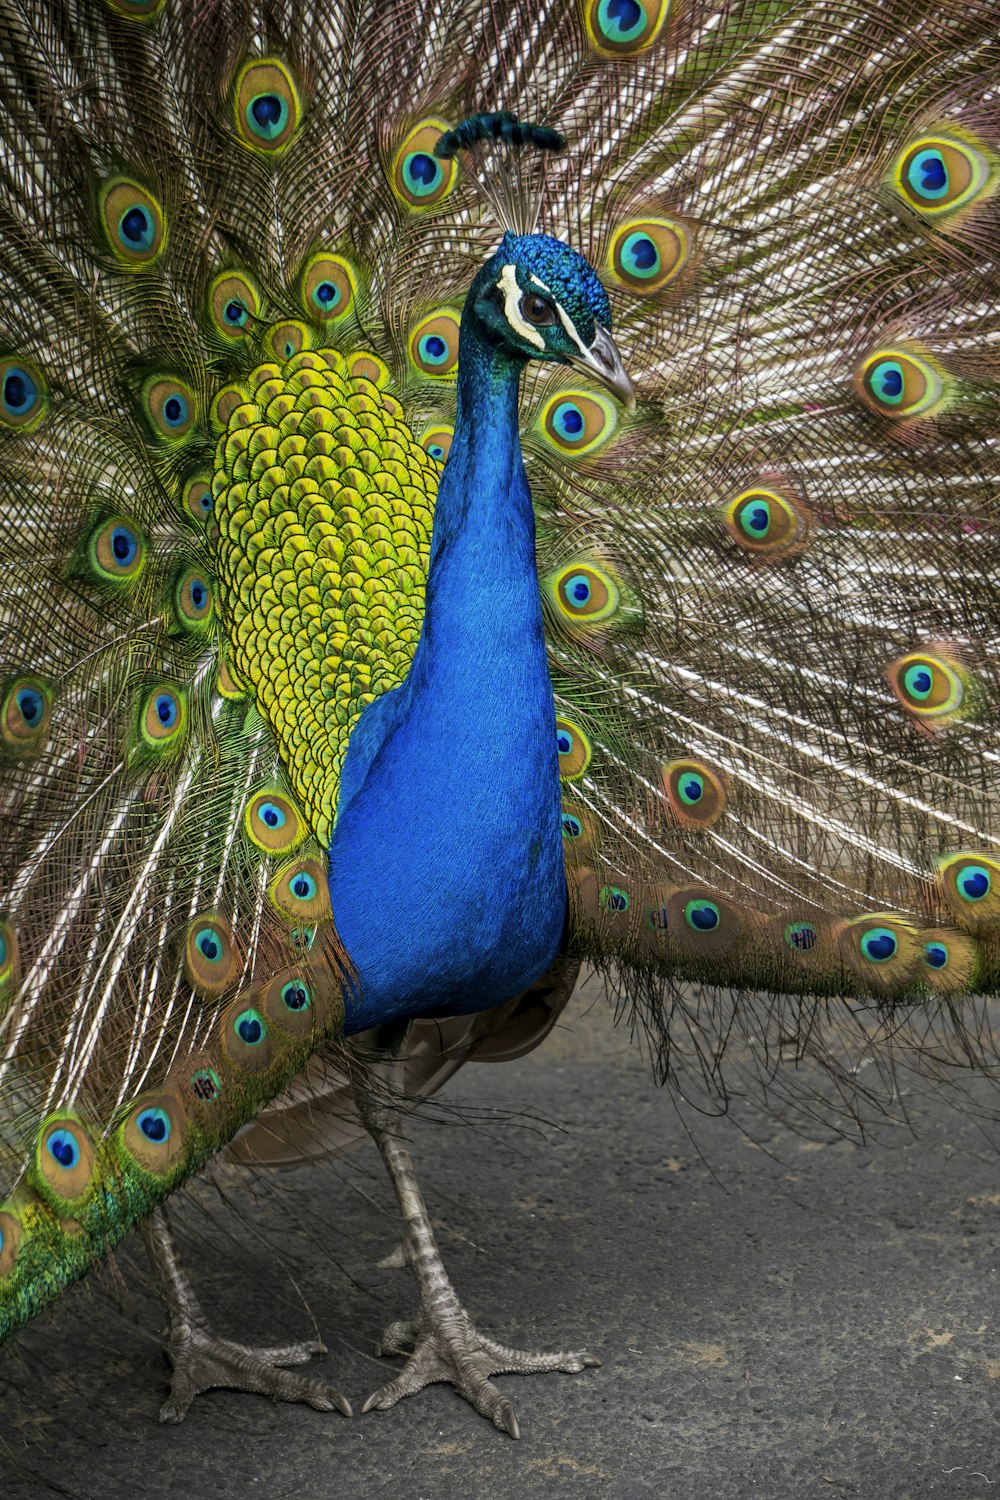 A close up view of a peacock with its feathers spread.